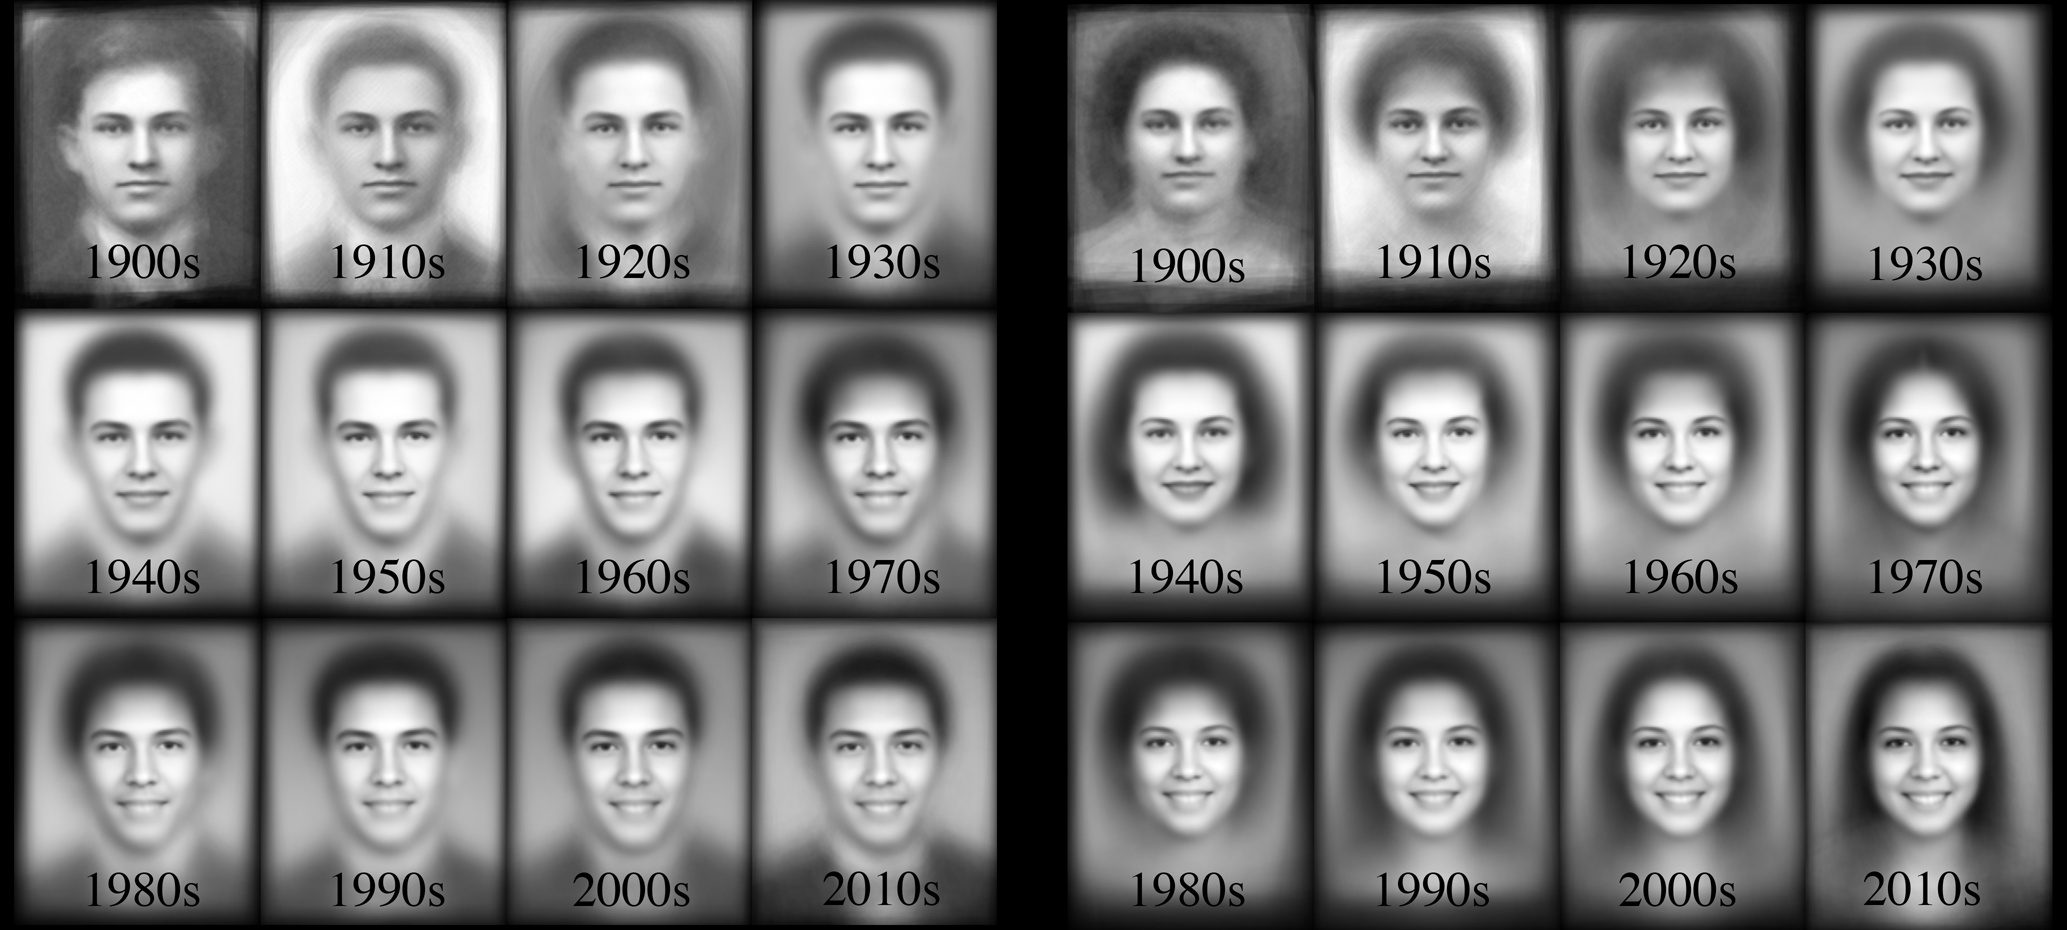 decade average images for the 20th century